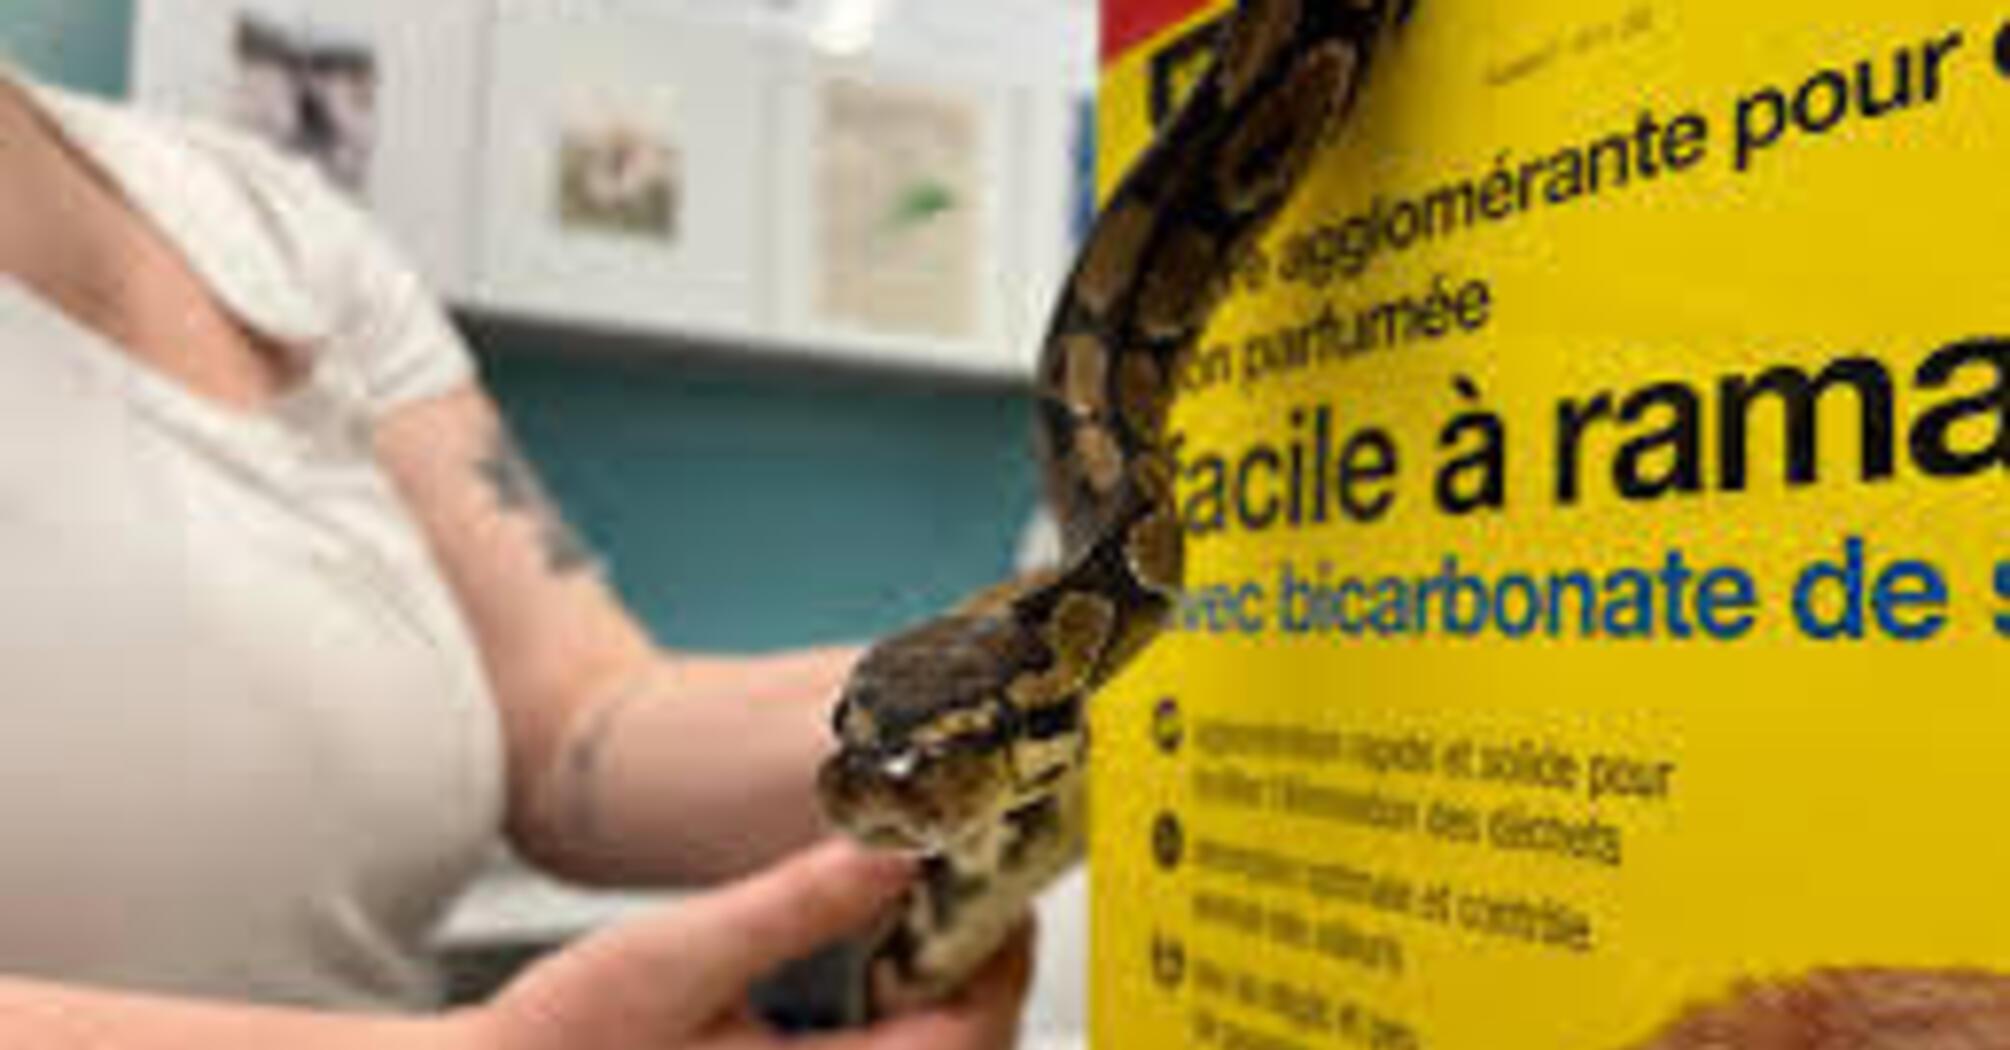 Ball python found rescued from Dumpster in Prince Edward Island